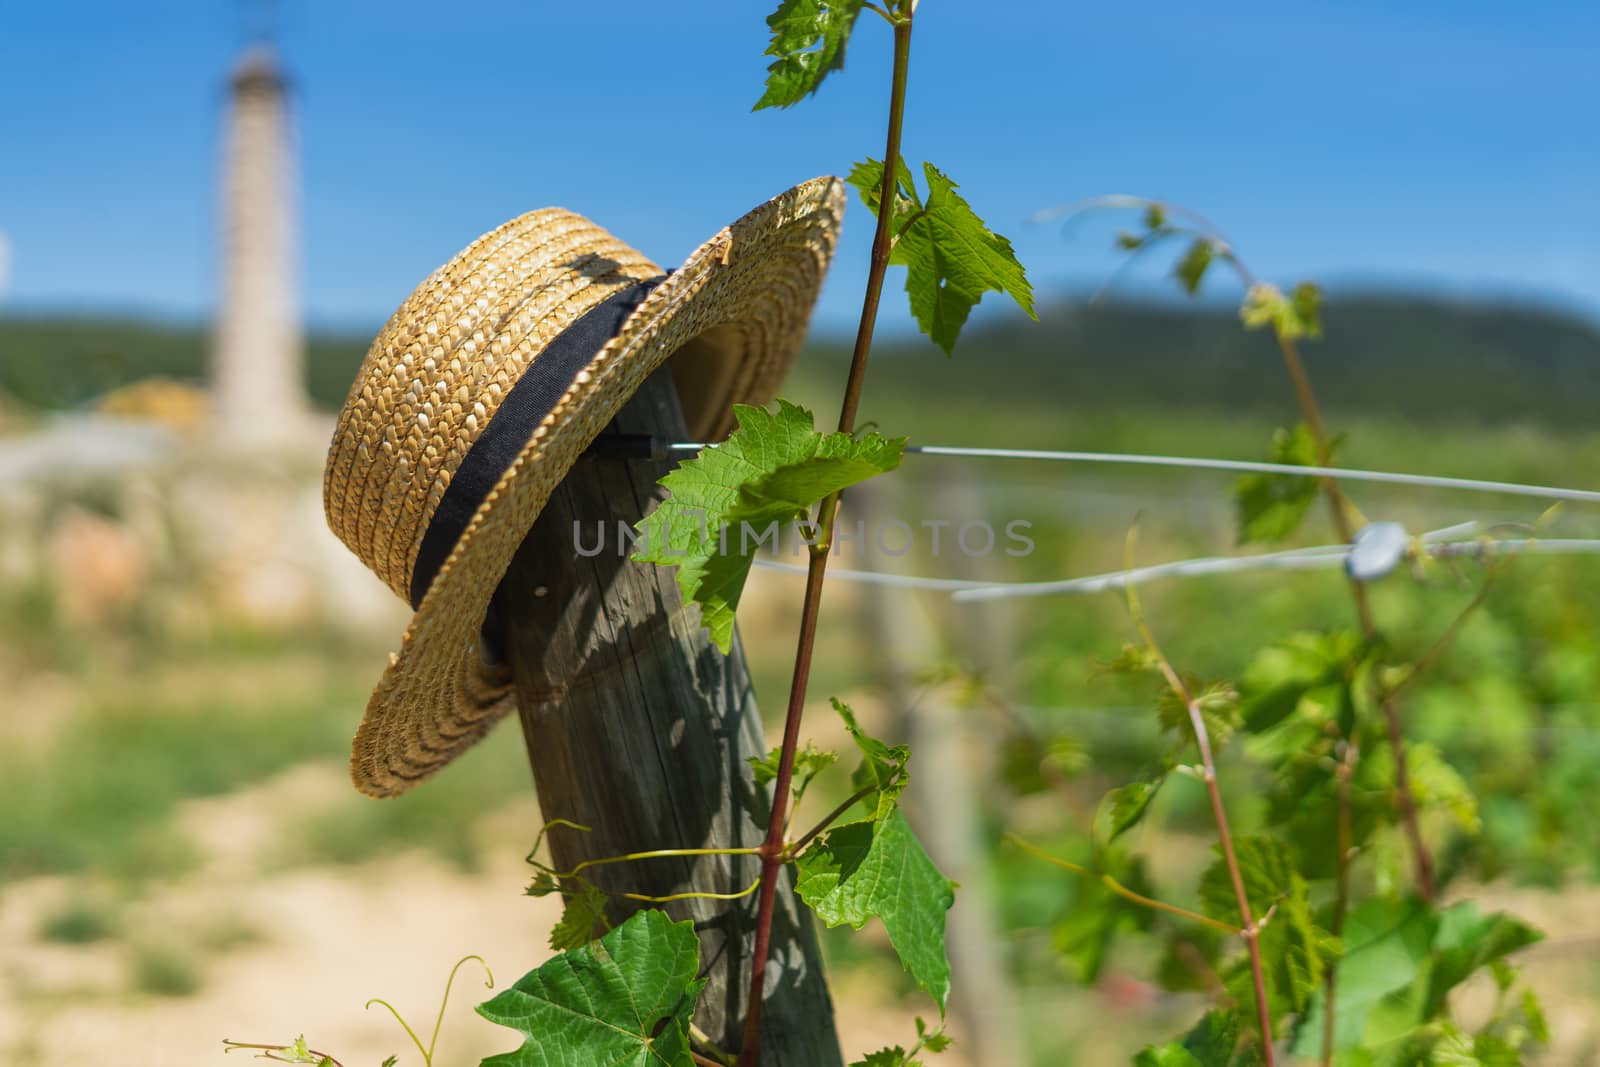 Close on a straw hat on an armrest on a vineyard pole in full sun